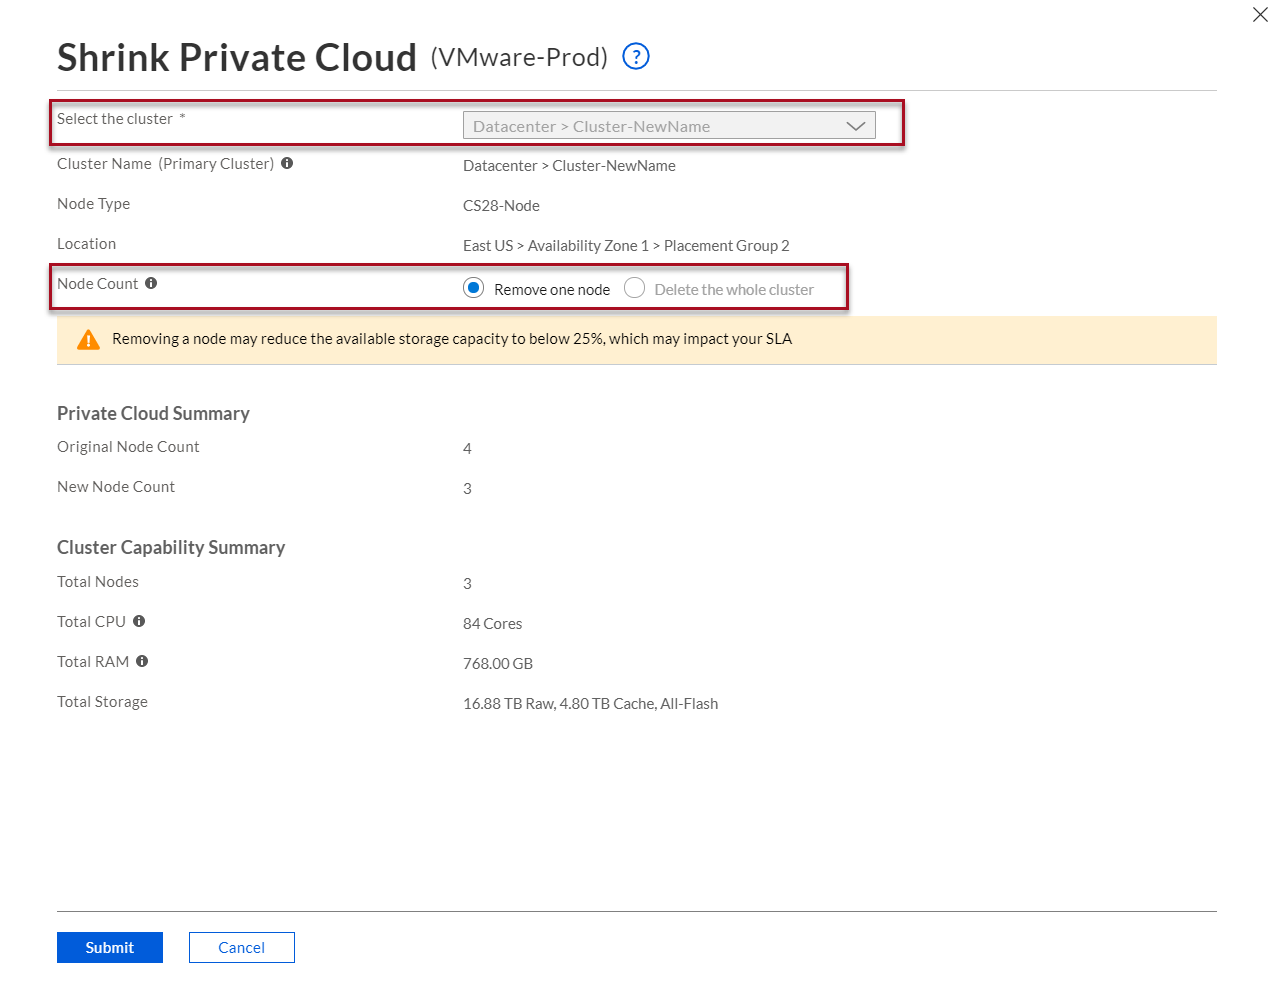 Shrink private cloud - select cluster